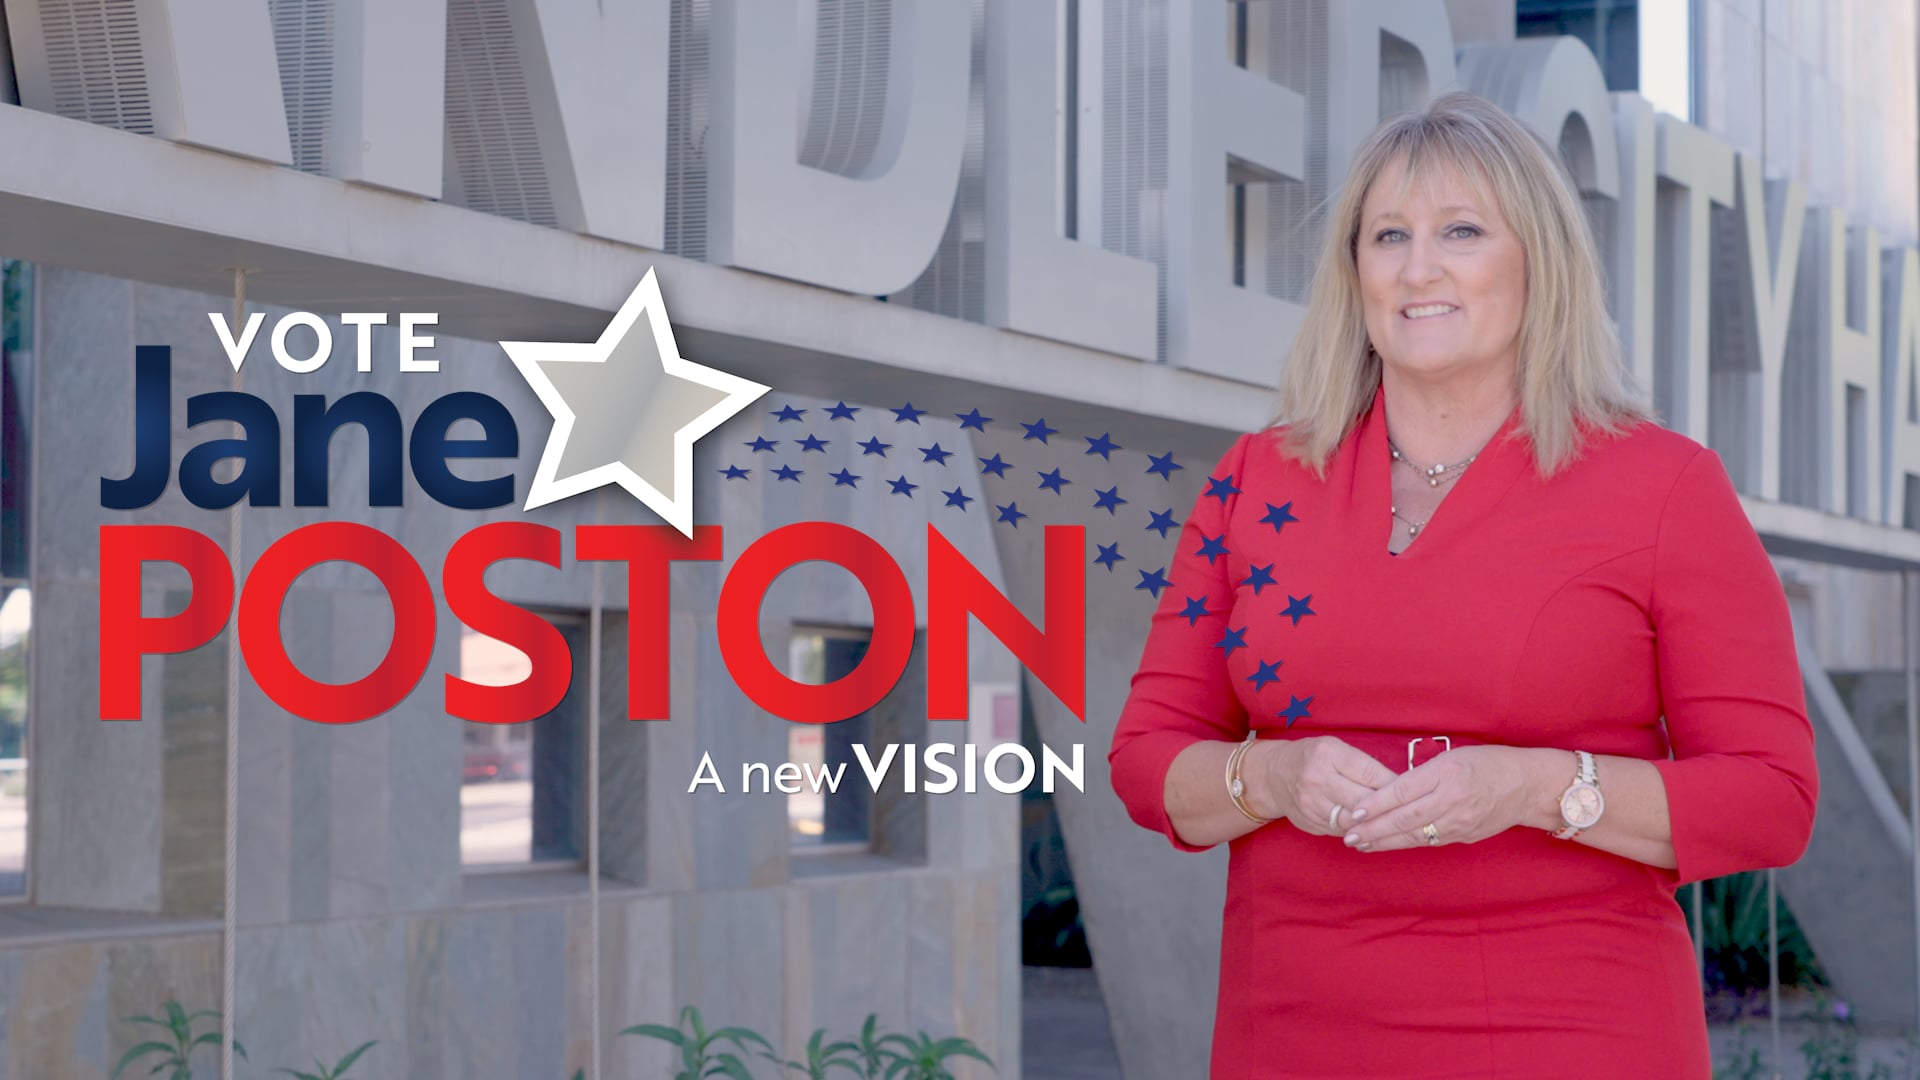 Jane Poston, Candidate for Chandler City Council